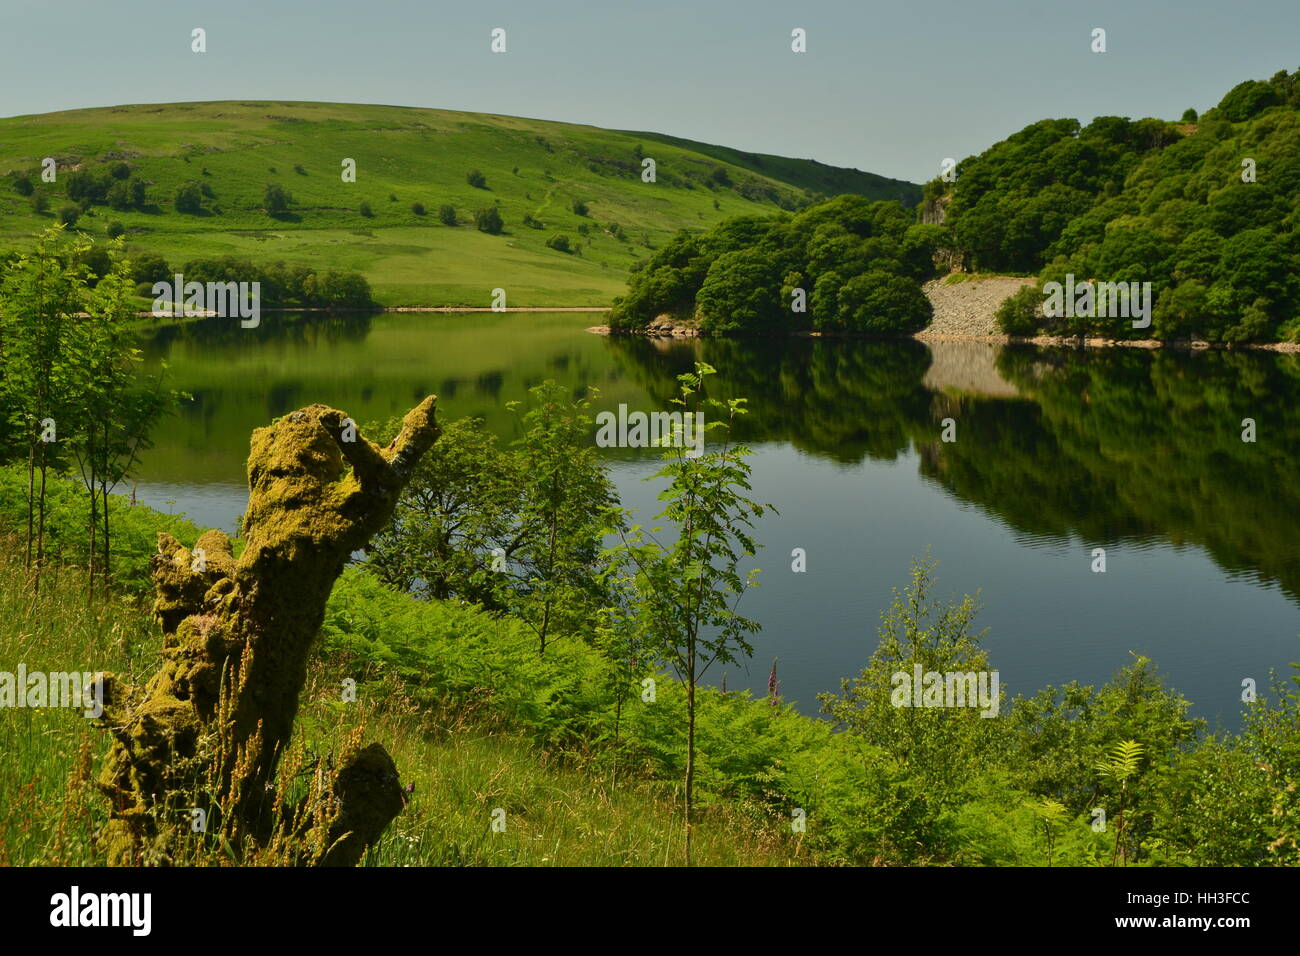 A lake on a summers day in the Elan Valley, Wales, UK with tree stump in foreground Stock Photo